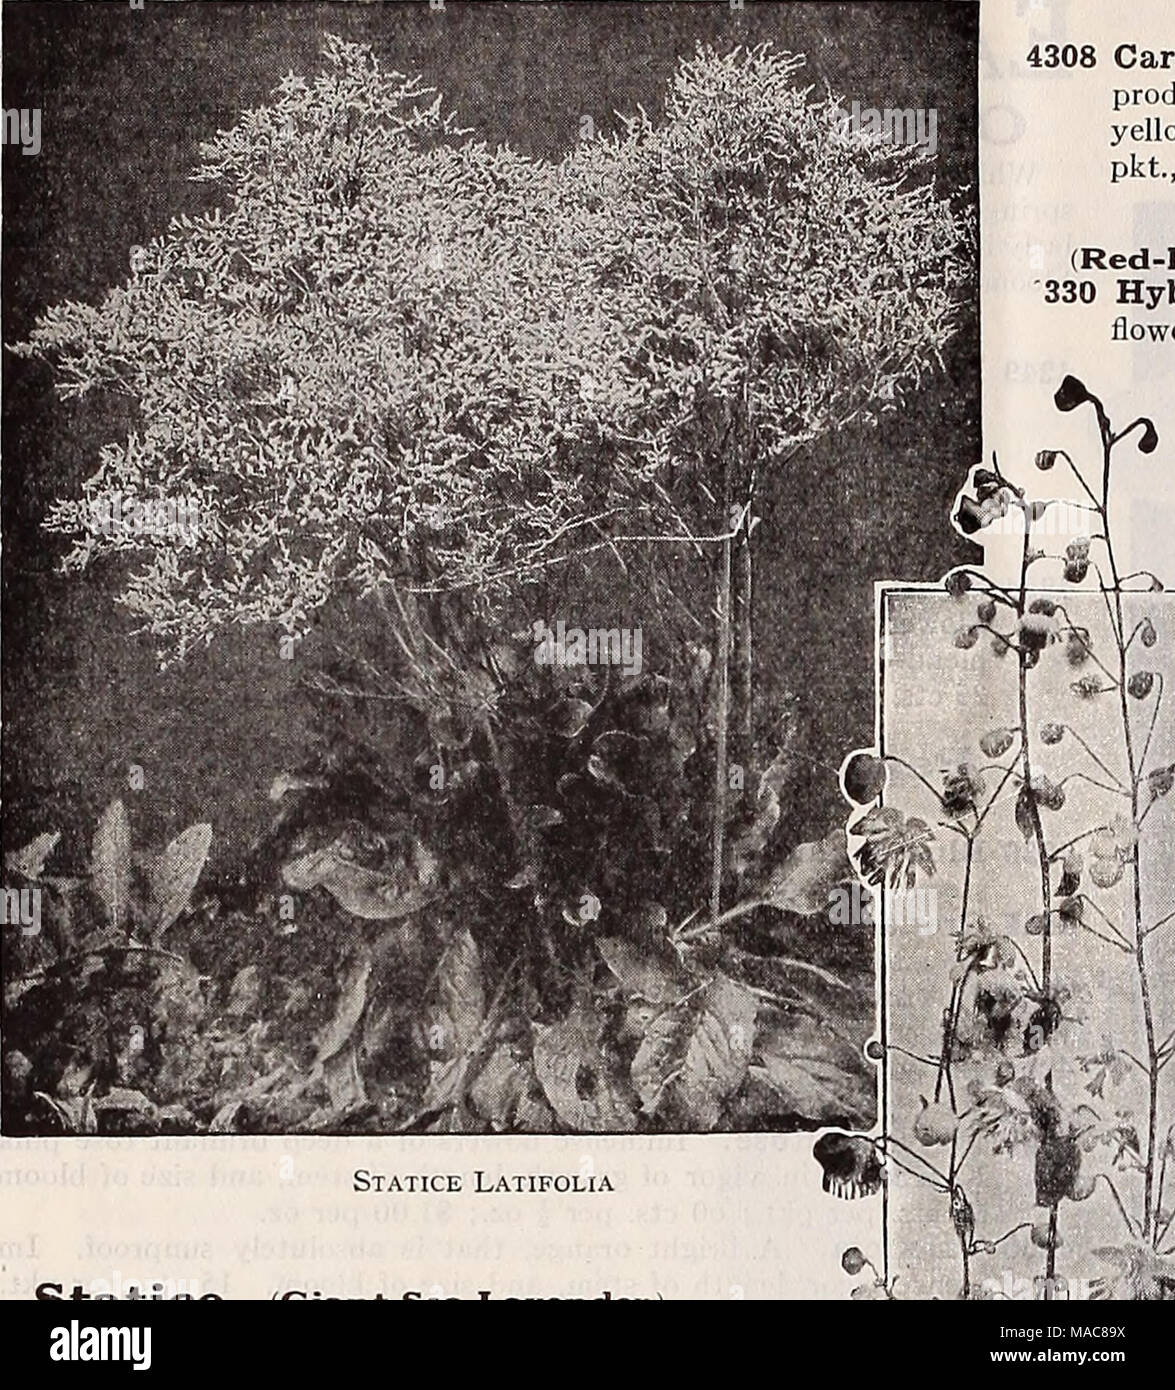 . Dreer's midsummer list 1932 . Statice (Giant Sea Lavender) Splendid hardy perennials, either for the border or rockery, producing all summer panicles of minute flowers, which can be dried and used for winter bouquets. PER Pkt. 3997 Latifolia. Immense candelabra- like heads of purplish-blue minute flowers during July and August. H ft. high. (See cut.)  oz., SO cts $0 10 4000 Incana Mixed. Containing many sorts, i oz., 30 cts '. 10 Thermopsis PER PKT Caroliniana. A showy, tall growing hardy perennial, producing in June and July, long spikes of lupin-like yellow flowers. 3 feet. Excellent for  Stock Photo